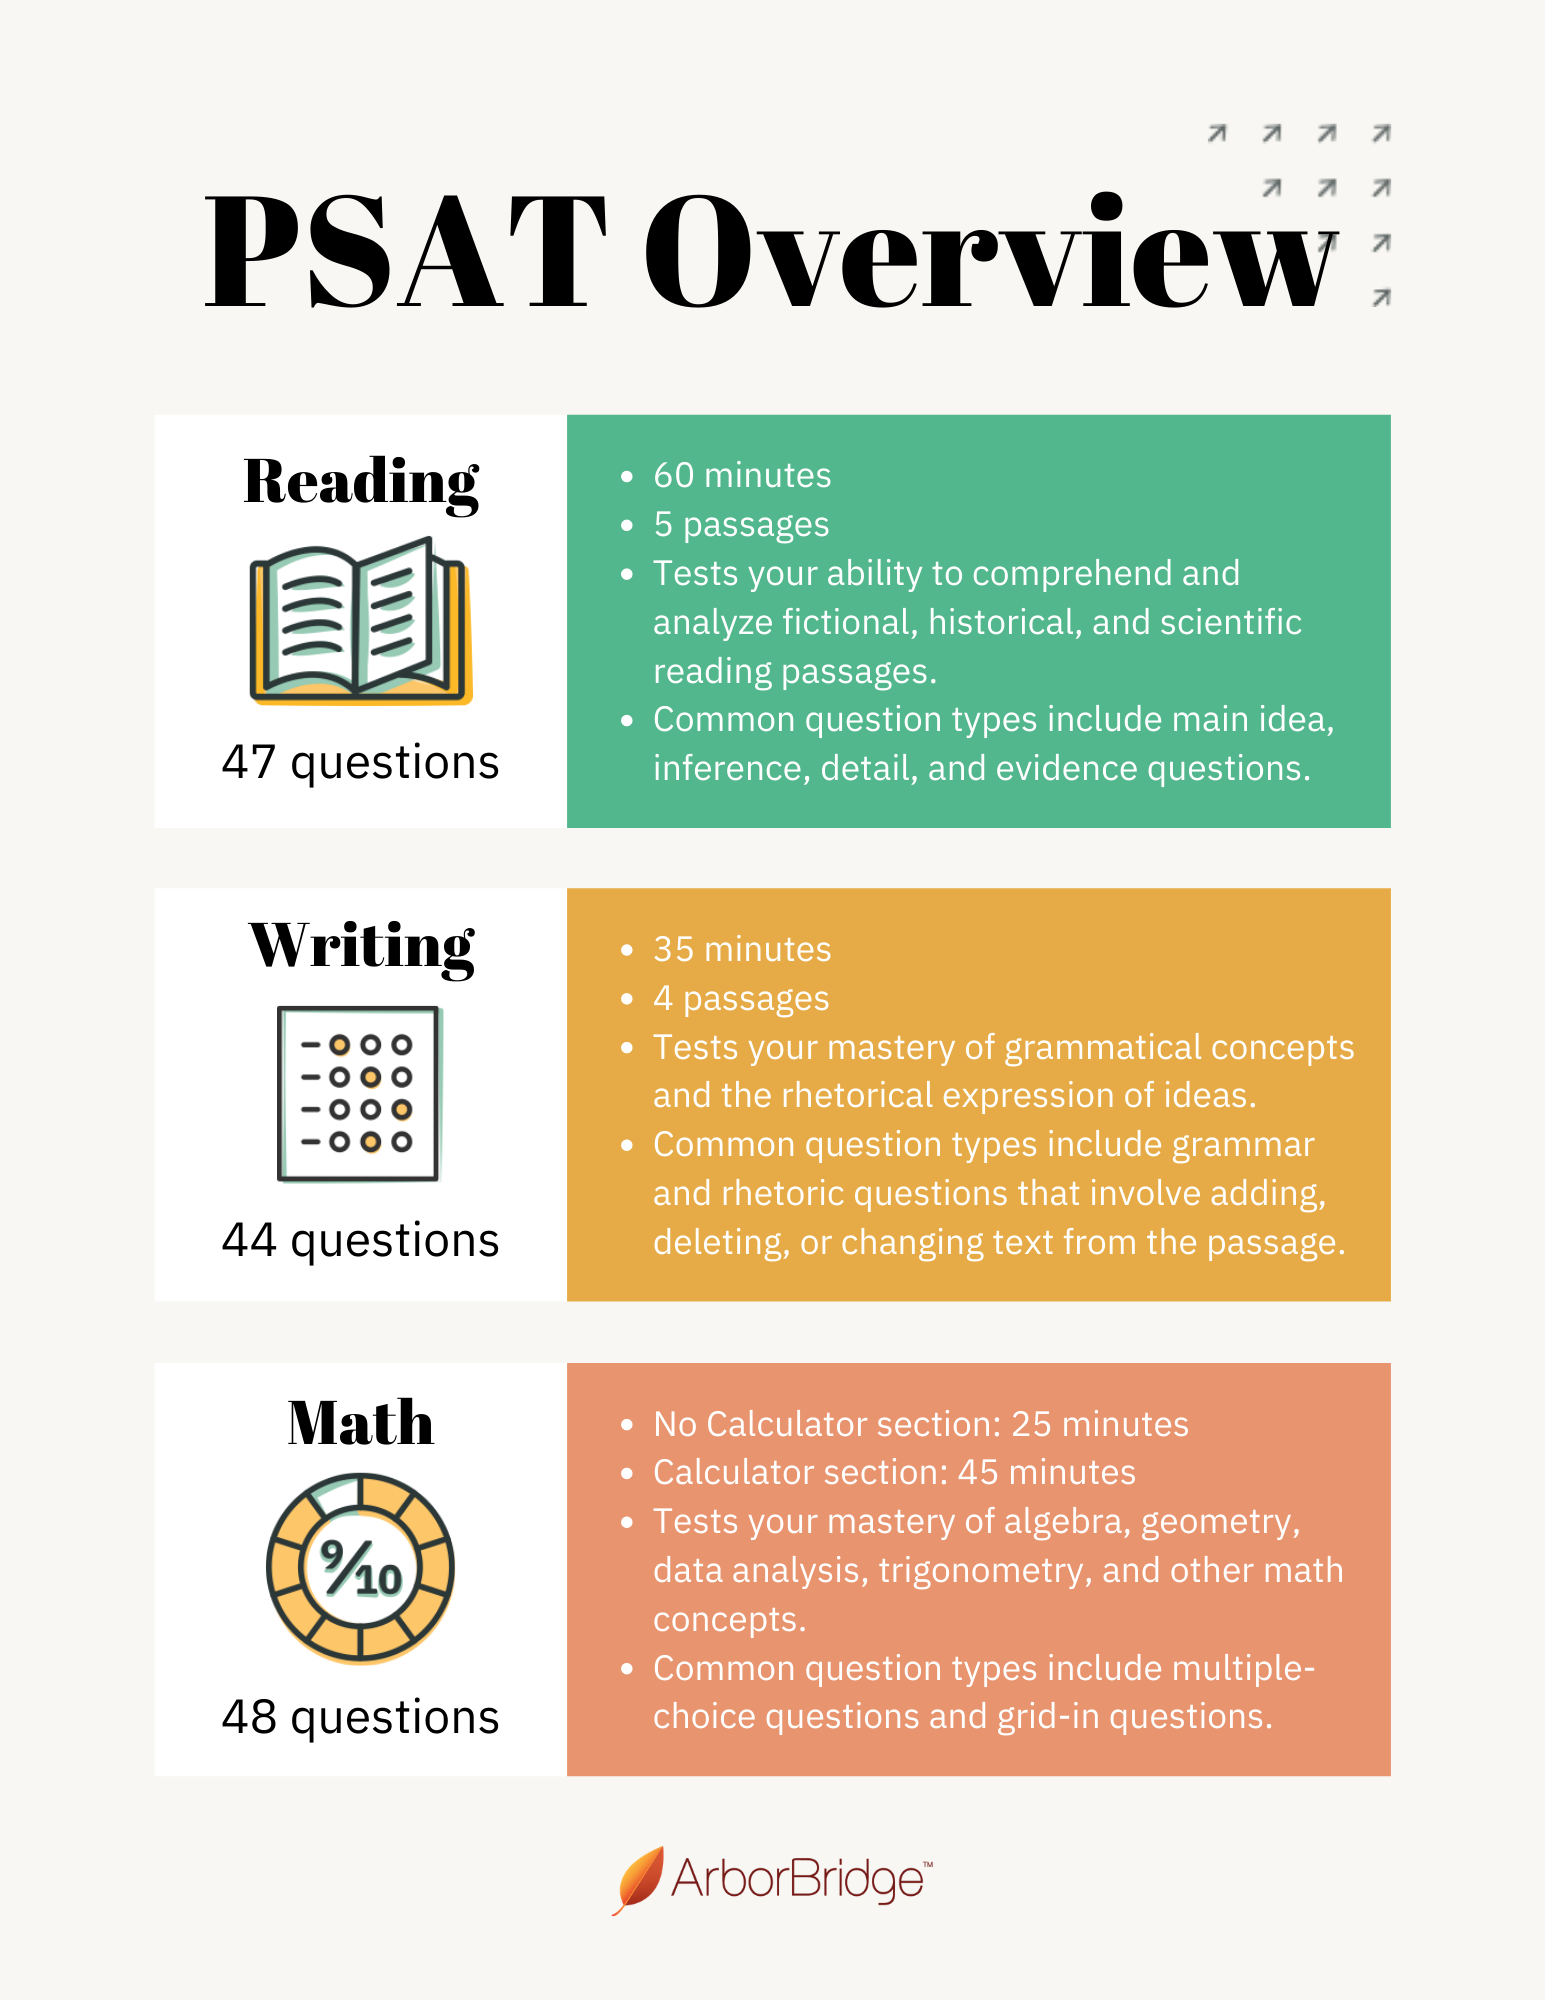 does the psat 10 have an essay